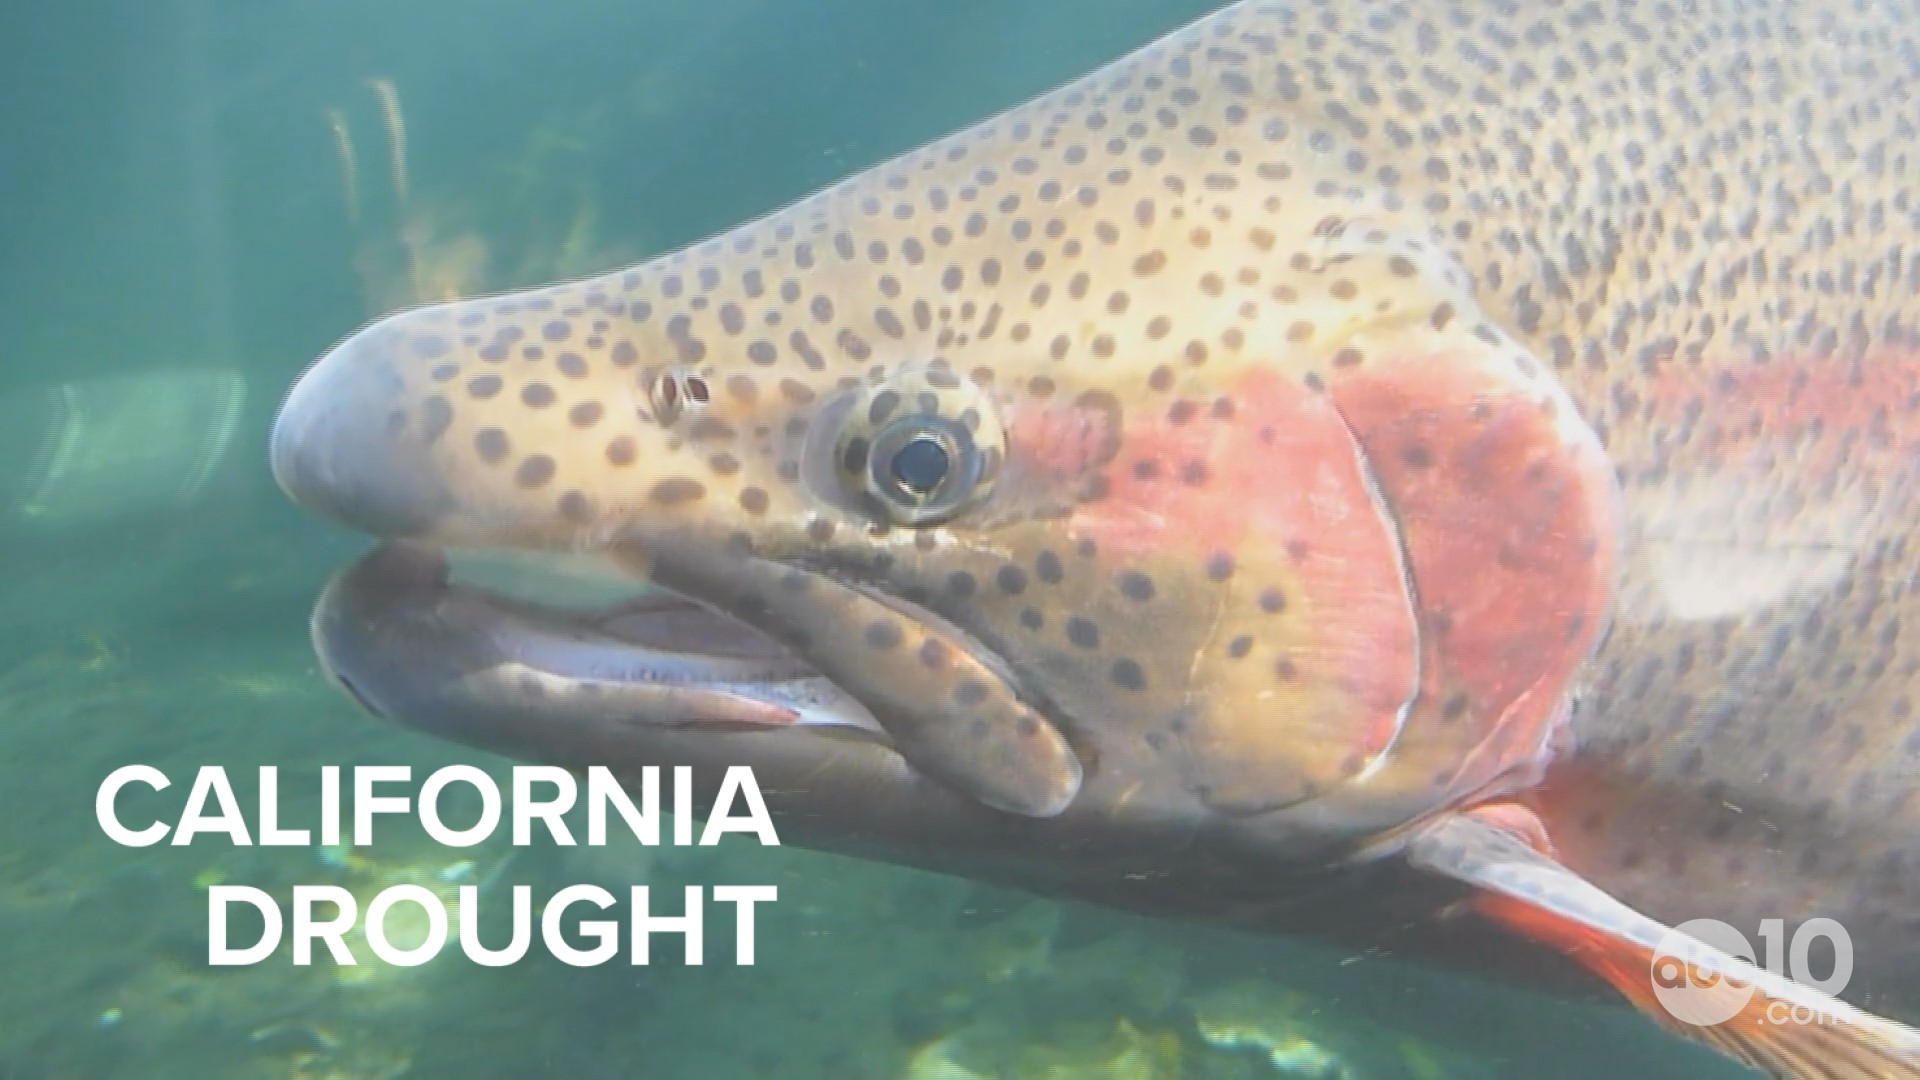 ABC10 meteorologist Brenden Mincheff shares the latest on the drought, plus drought impacts on the keystone species of trout and salmon.